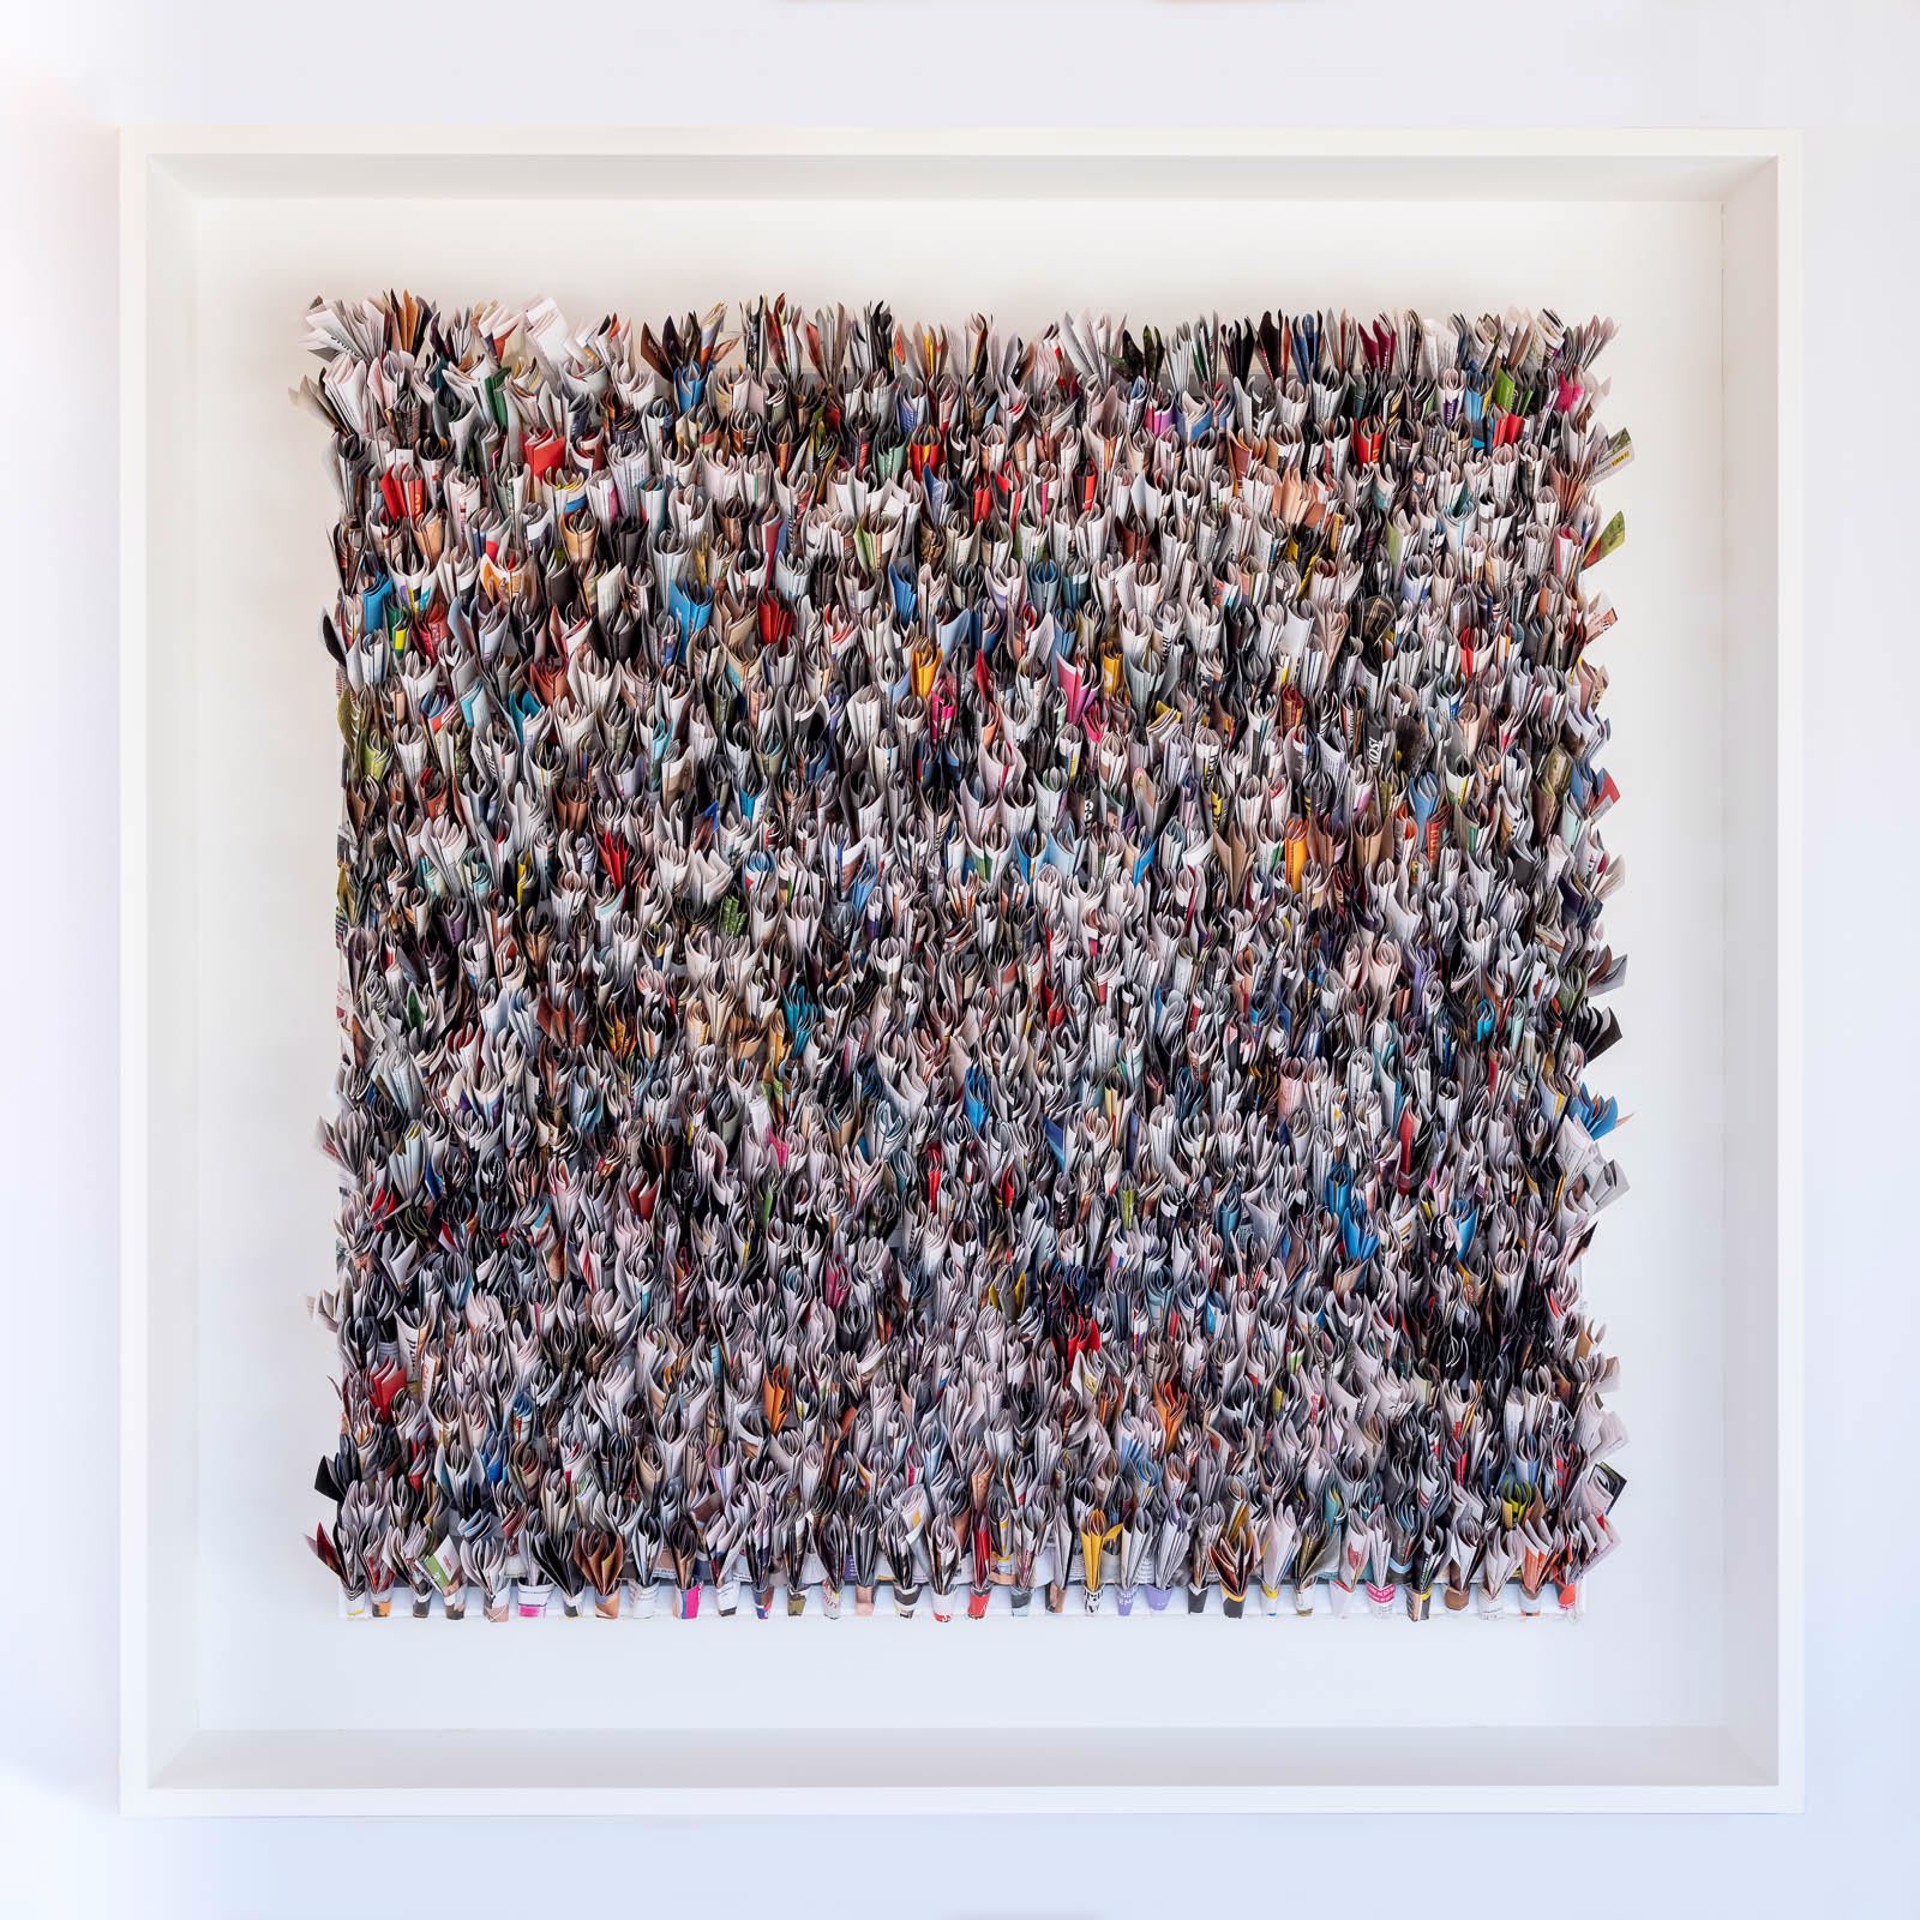 People - A Crowd by Robyn Thomas